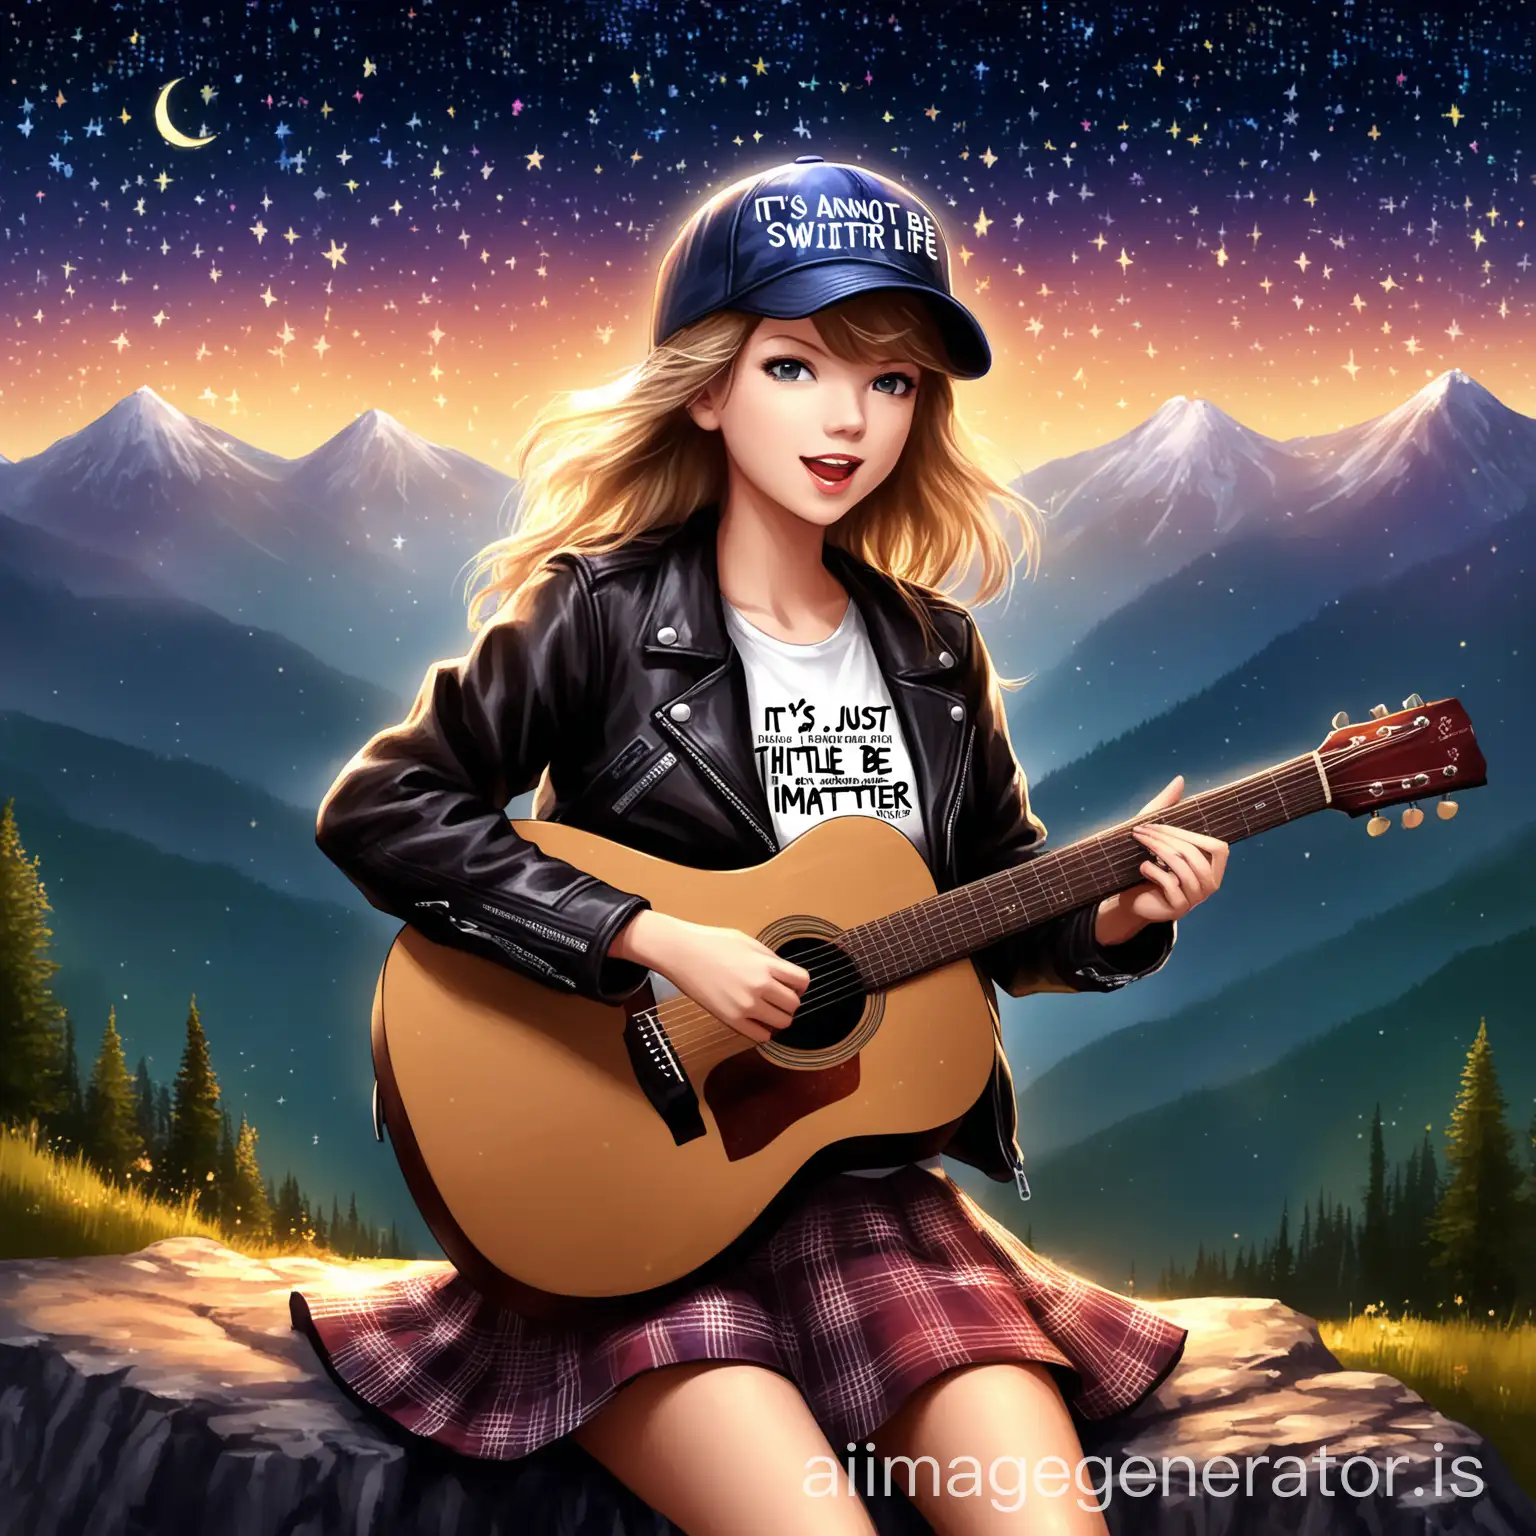 Generate a futuristic image of an 18-year-old Girl with a Taylor Swift cap + white t-shirt  with funny girl print + leather jacket + check skirt + Enjoying Music Night after a backpacking journey in the mountain range + playing acoustic guitar + Tag Line in the back ground: It's just another day and the little things In life that matter, So don't be afraid to sparkle or a little brighter +